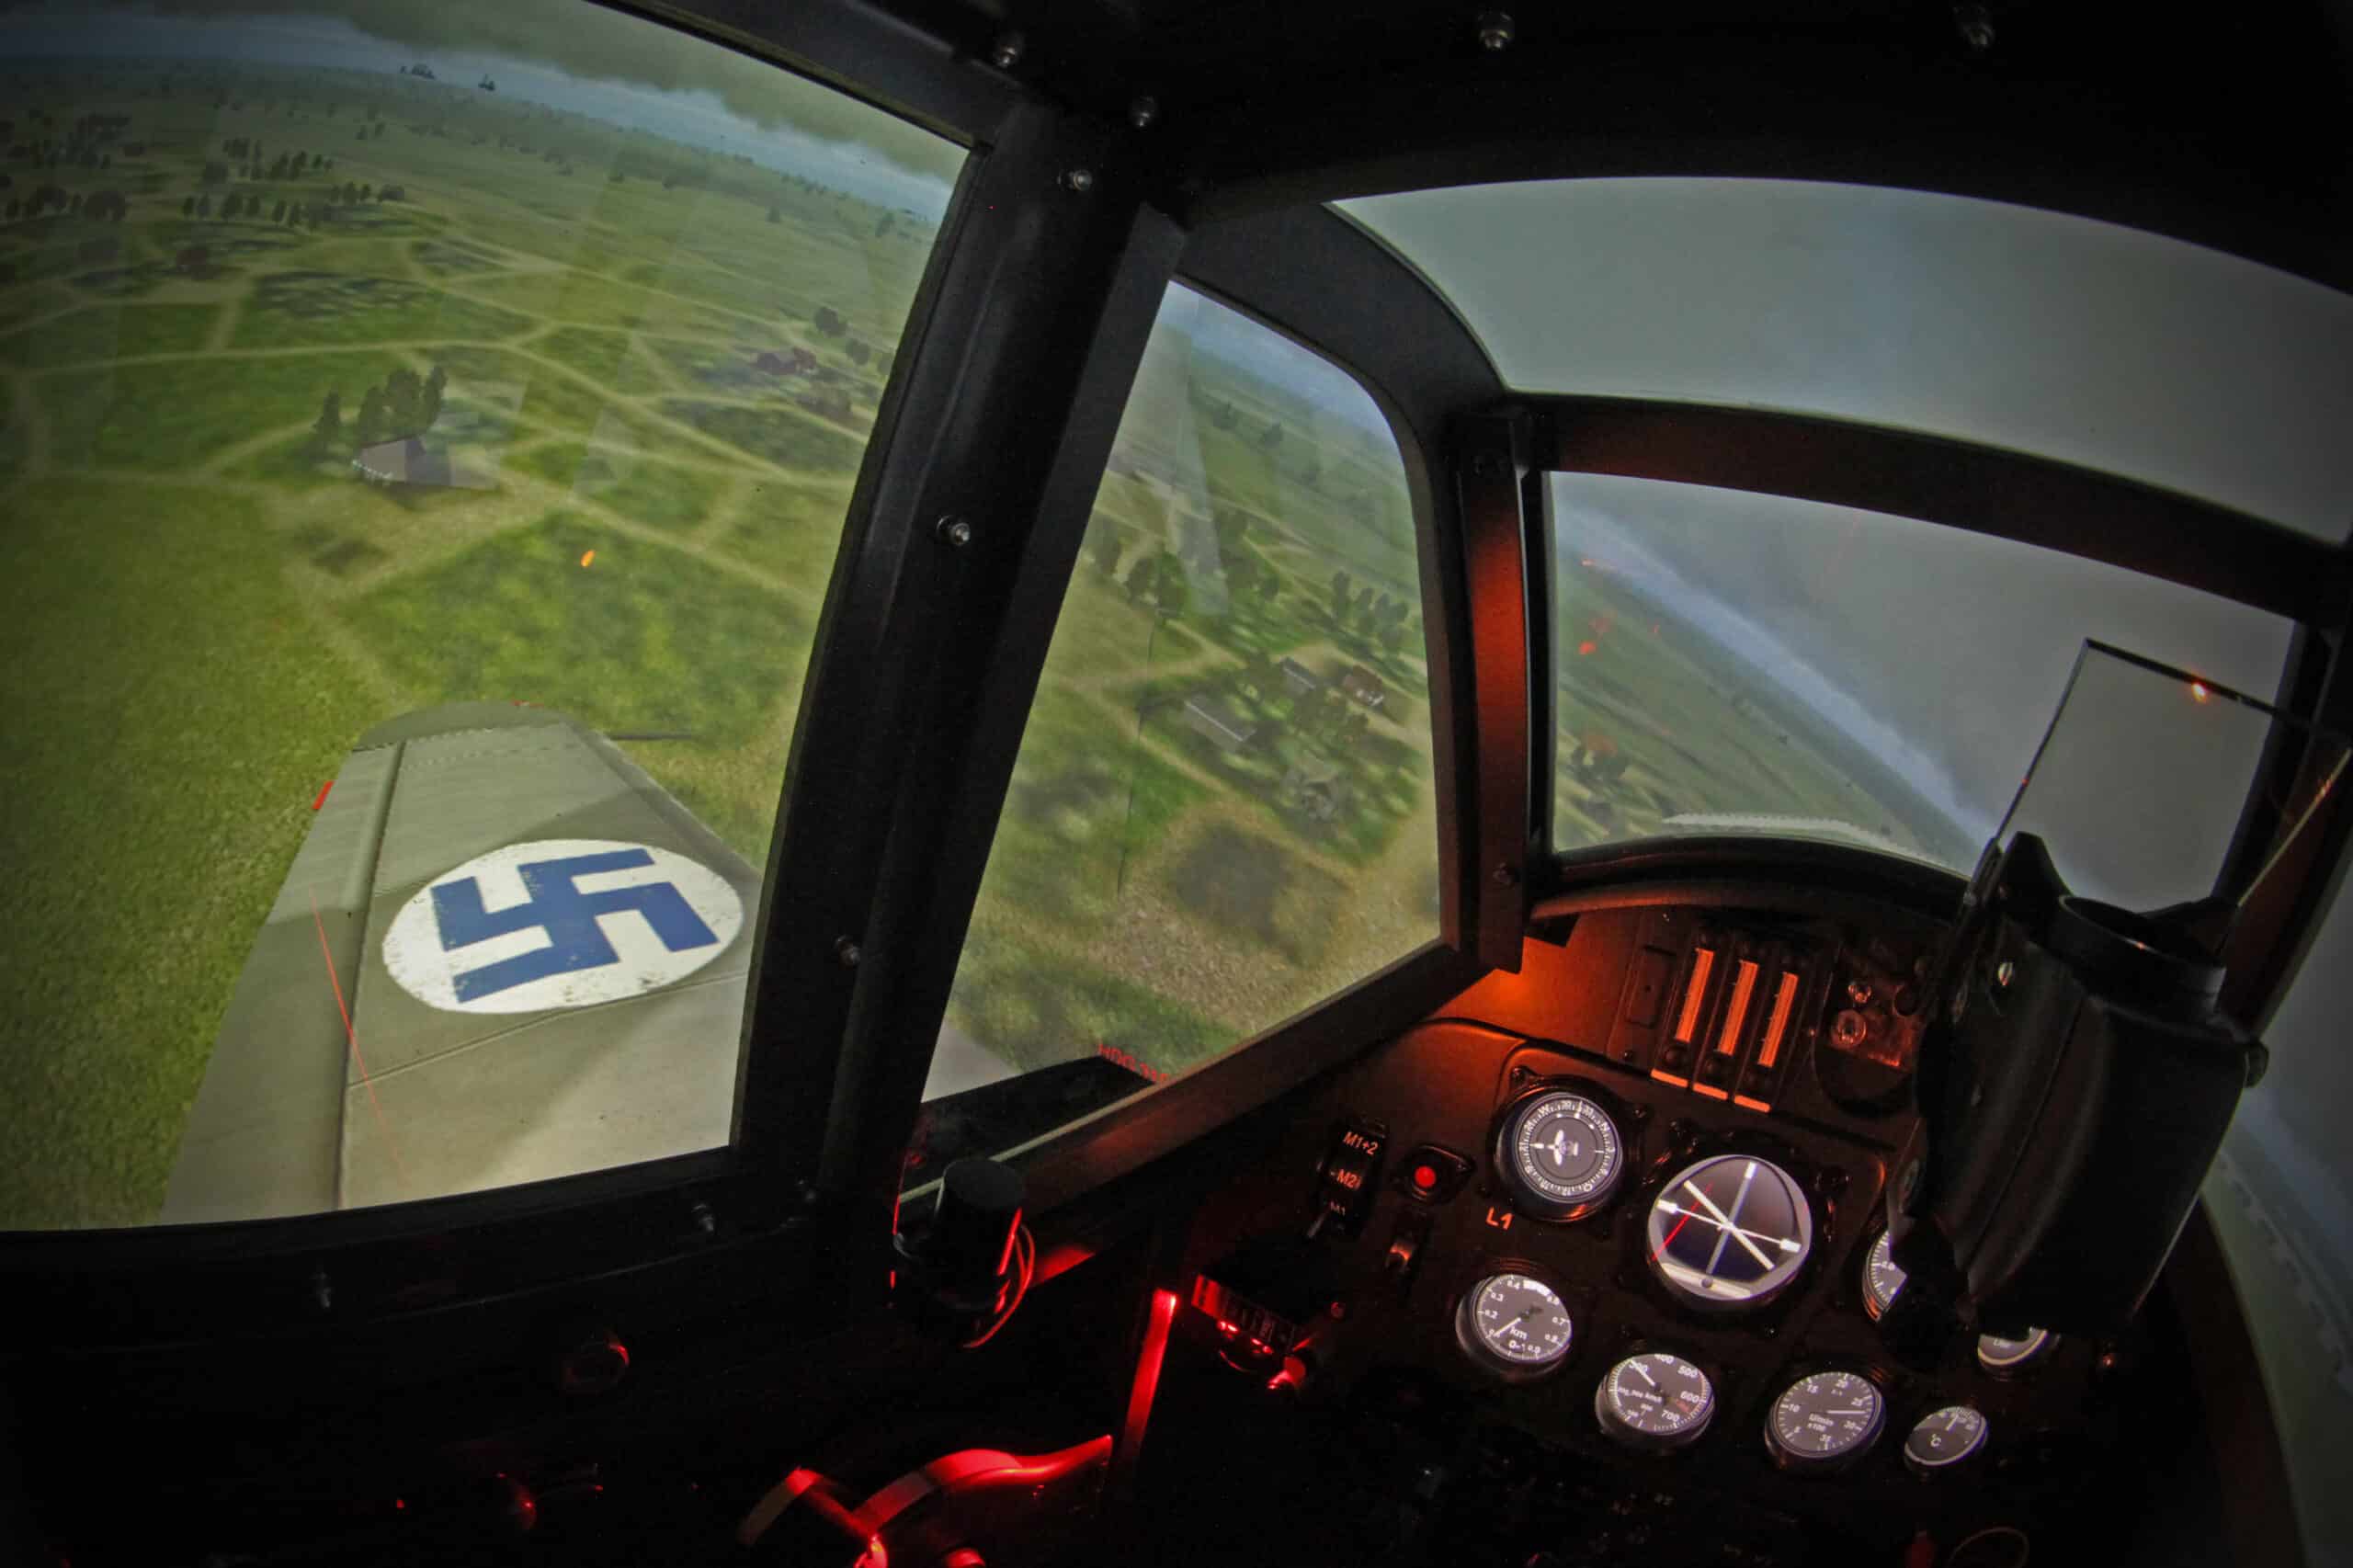 Simulator cockpit with a realistic view out.